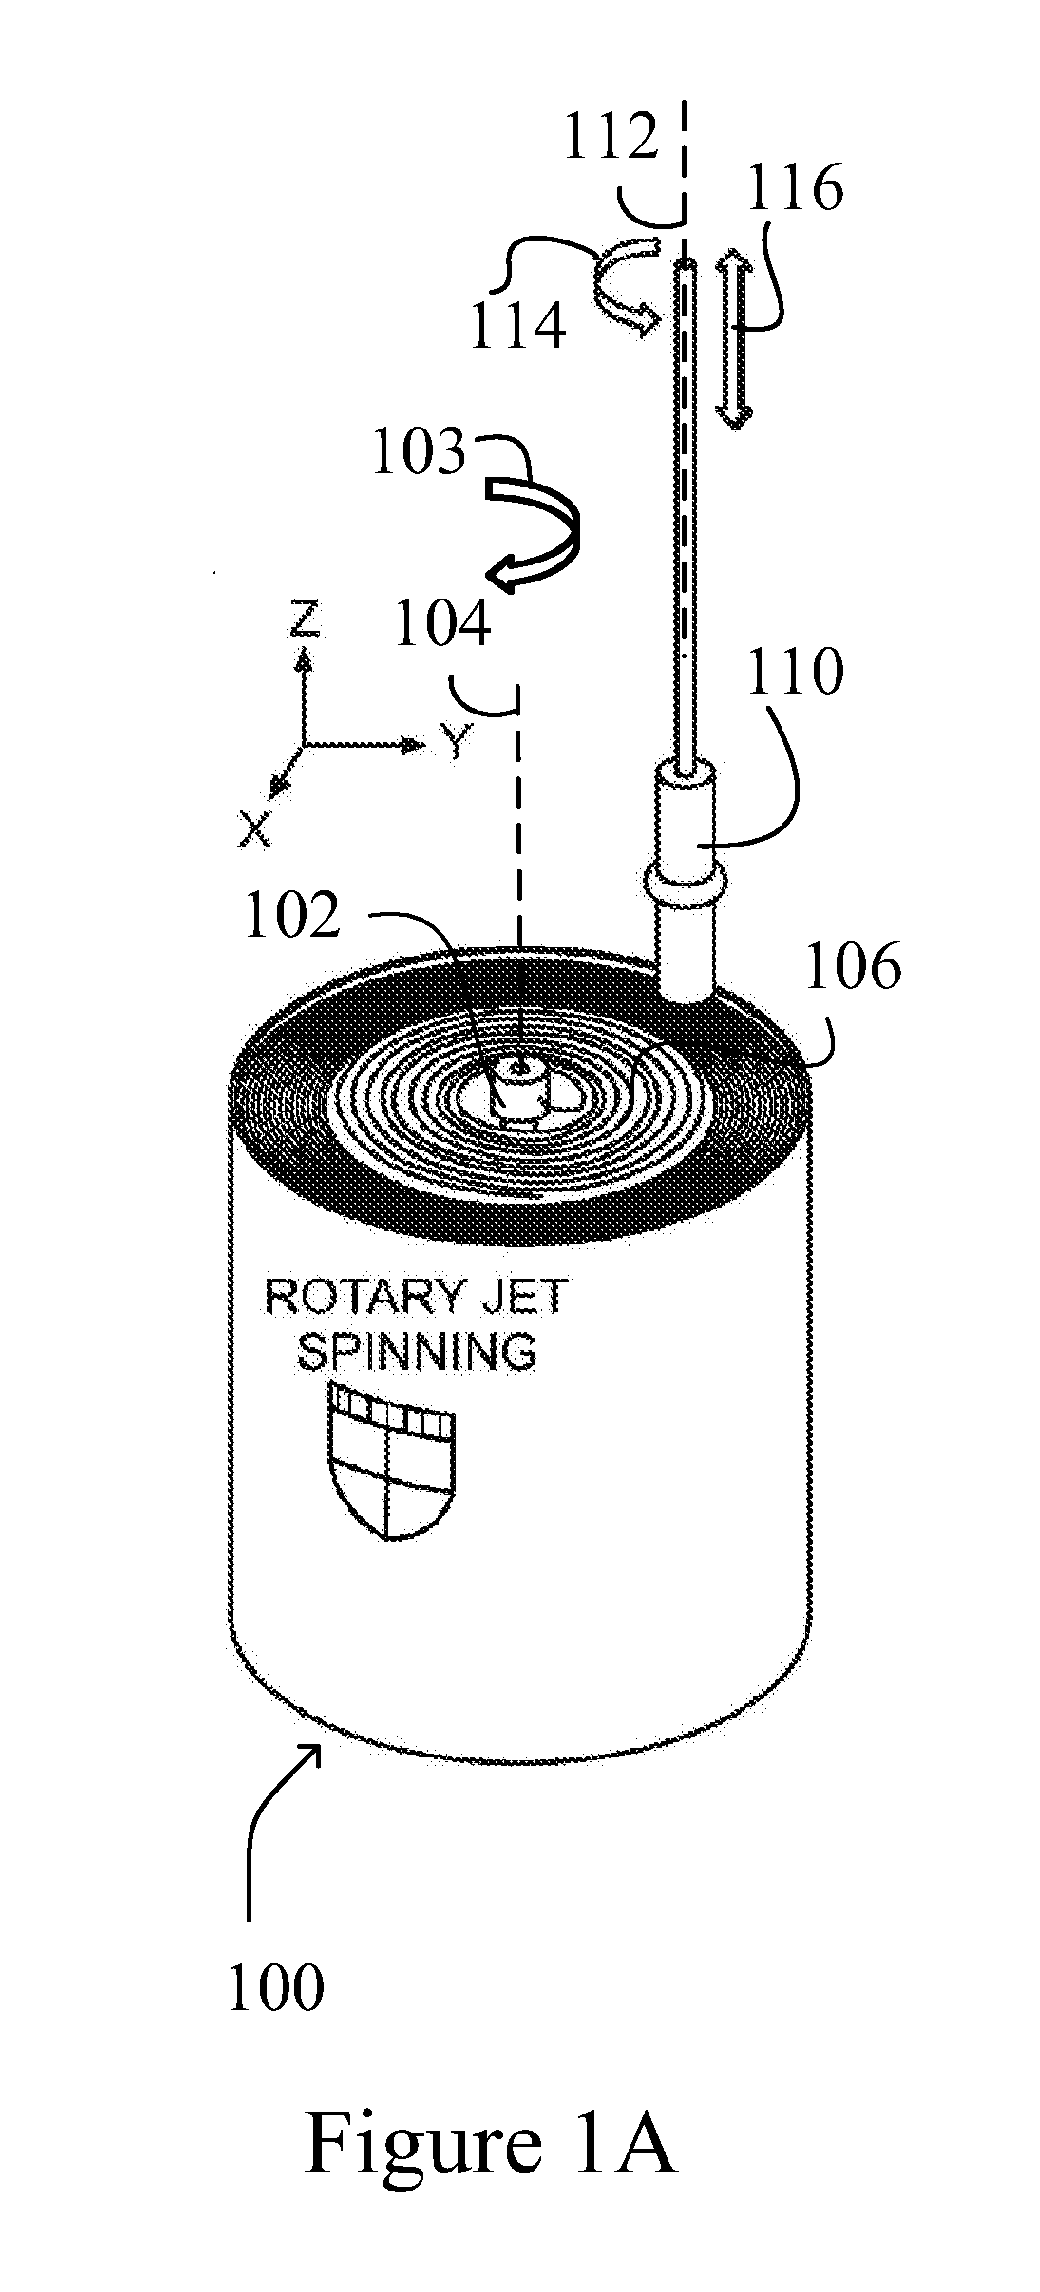 Engineered polymeric valves, tubular structures, and sheets and uses thereof